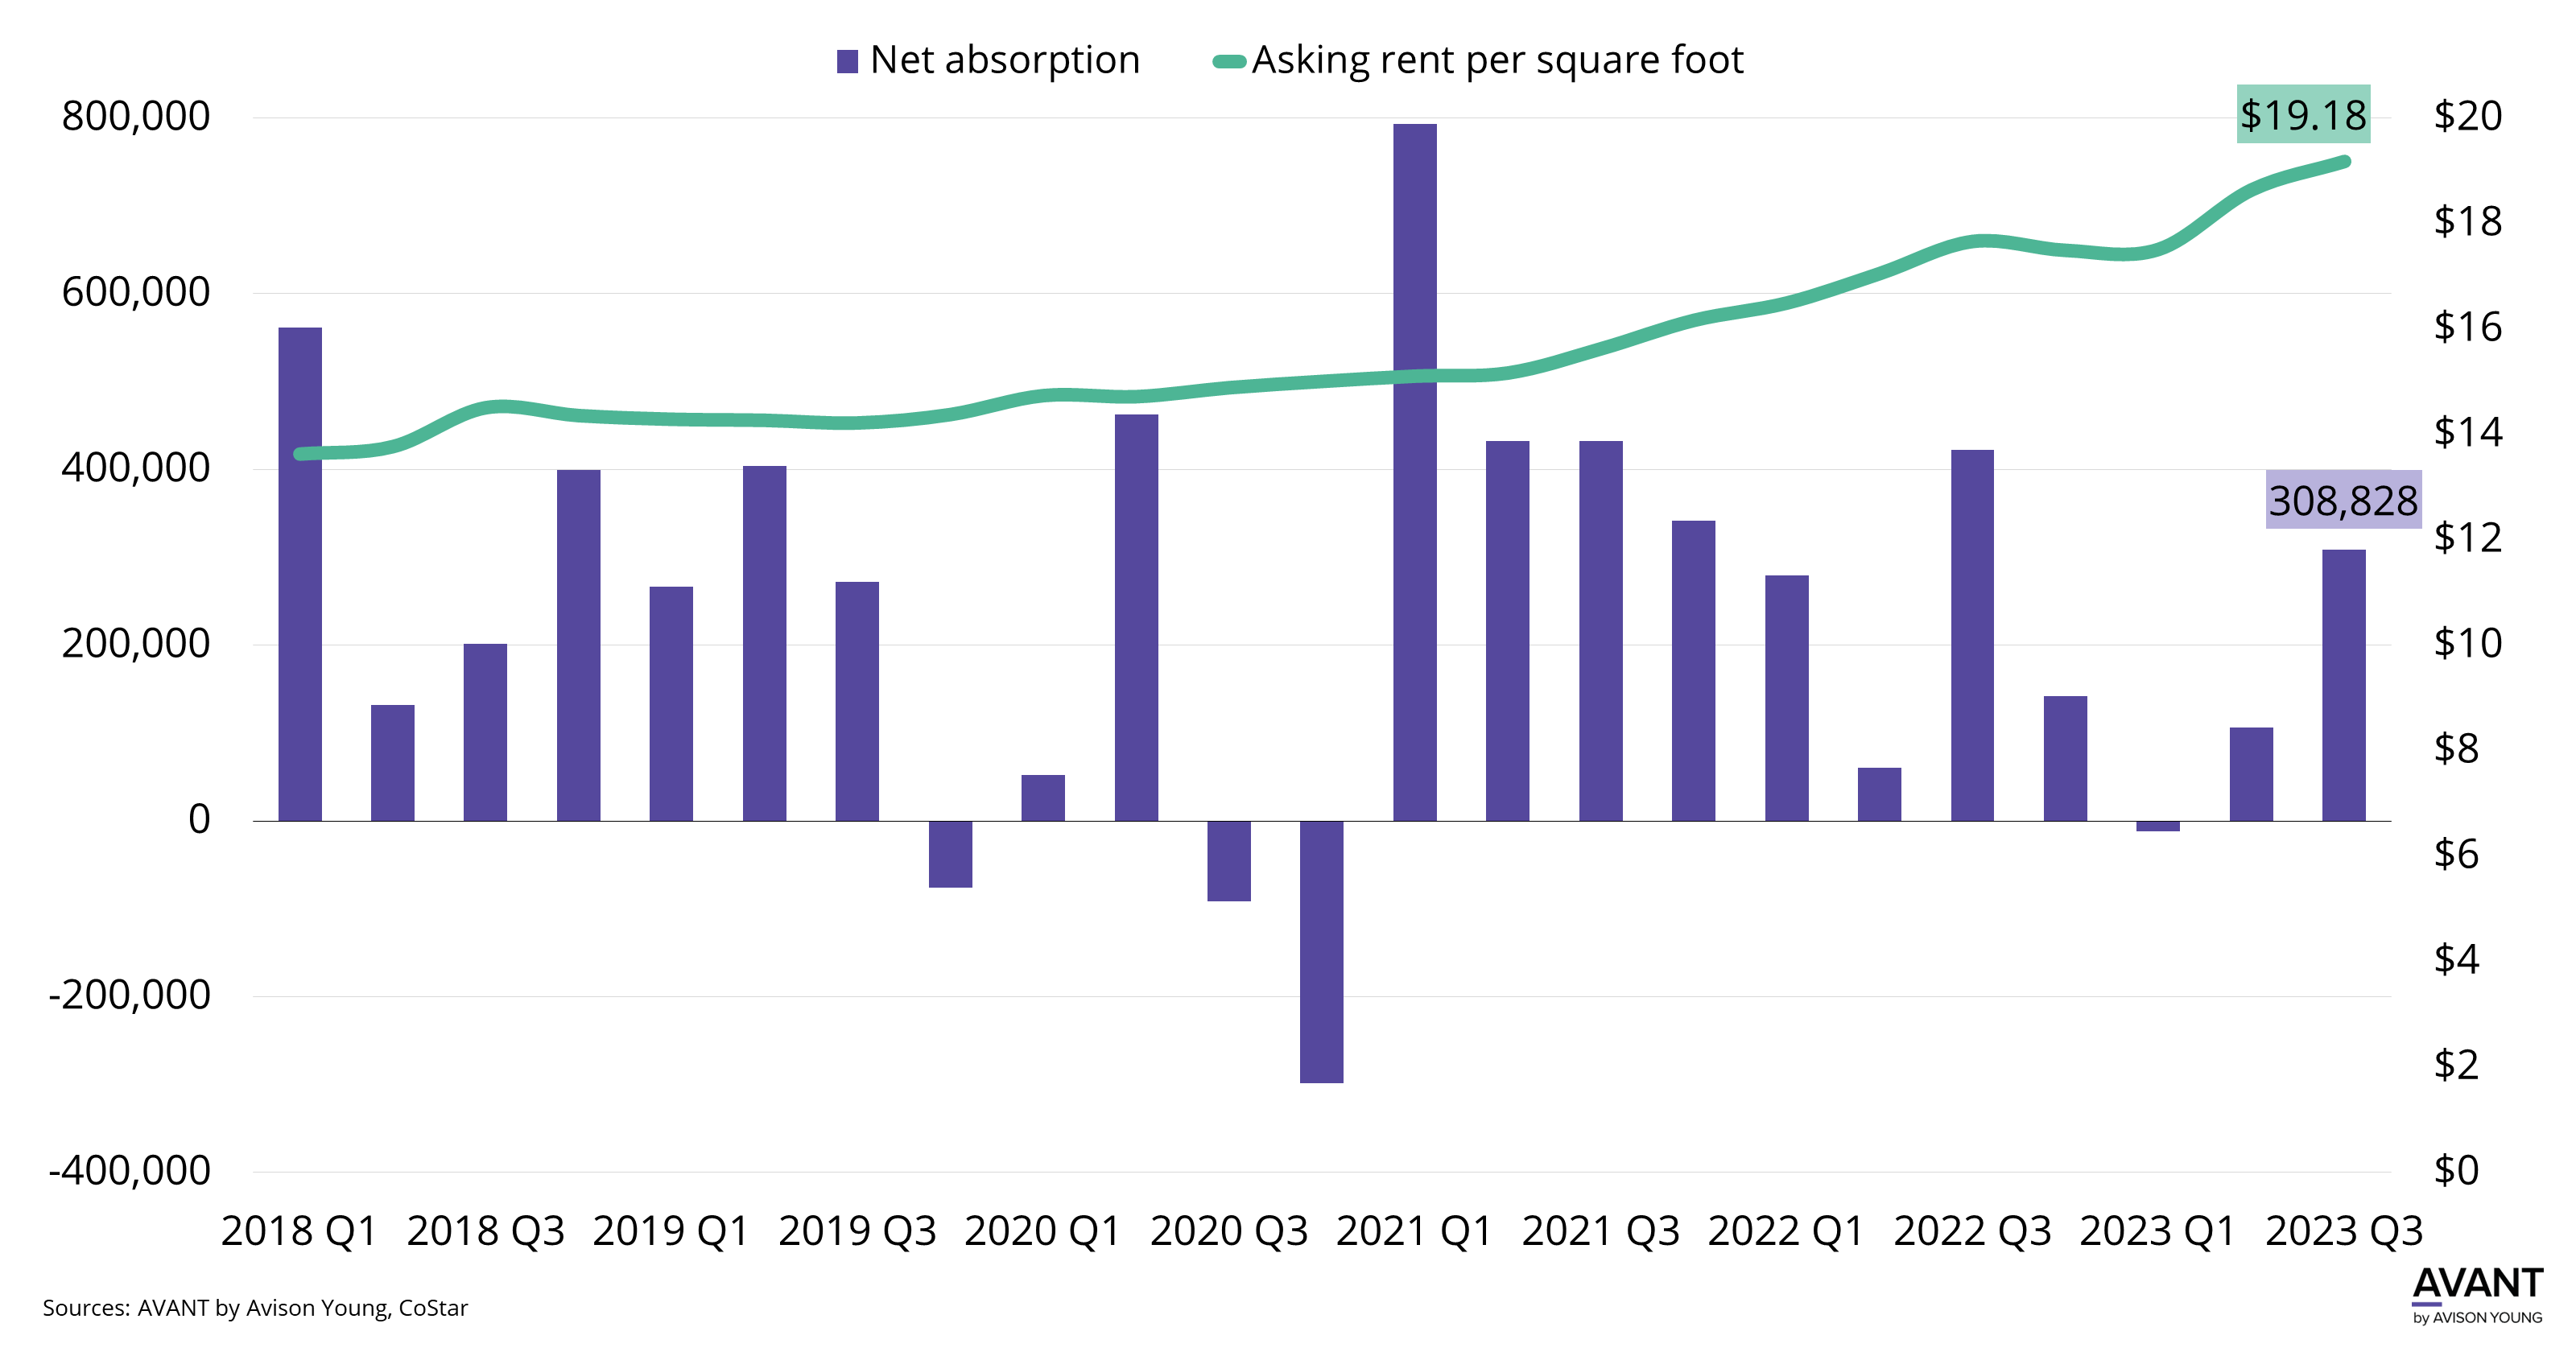 graph of net absorption and asking rent per square foot in Jacksonville's retail market from Q1 2018 to Q3 2023